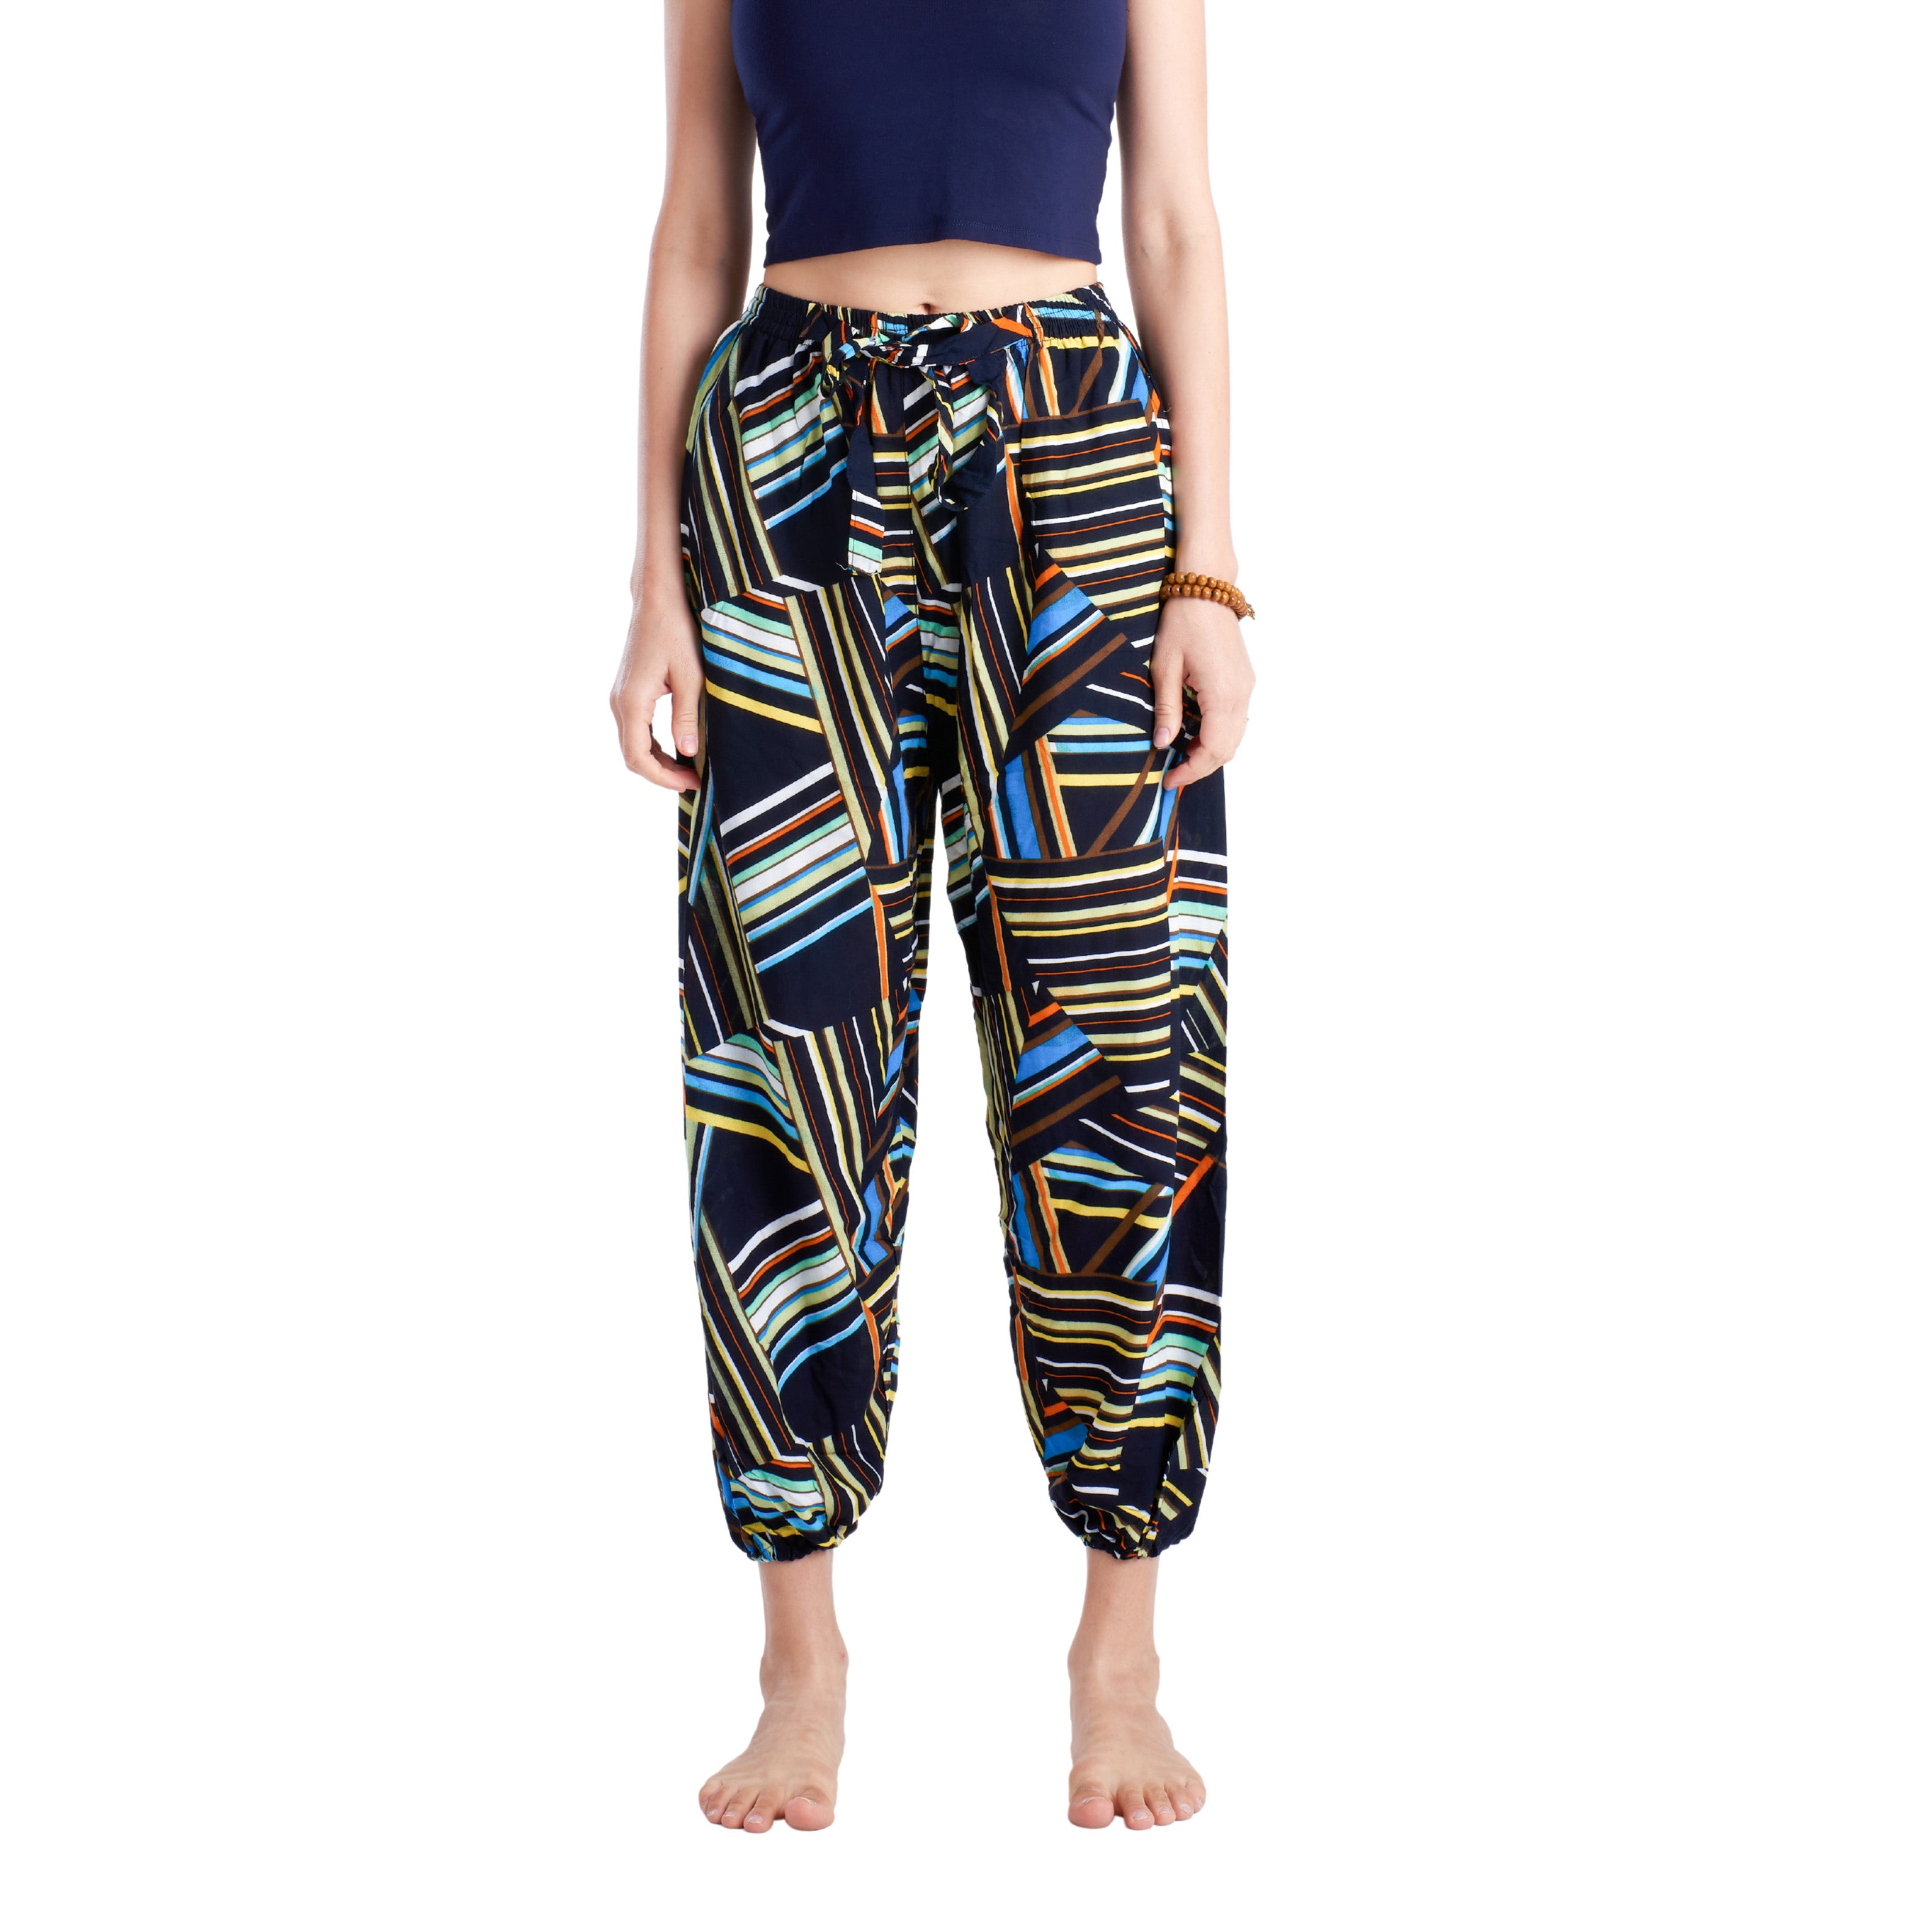 CANZUL PANTS - Drawstring Elepanta Drawstring Pants - Buy Today Elephant Pants Jewelry And Bohemian Clothes Handmade In Thailand Help To Save The Elephants FairTrade And Vegan